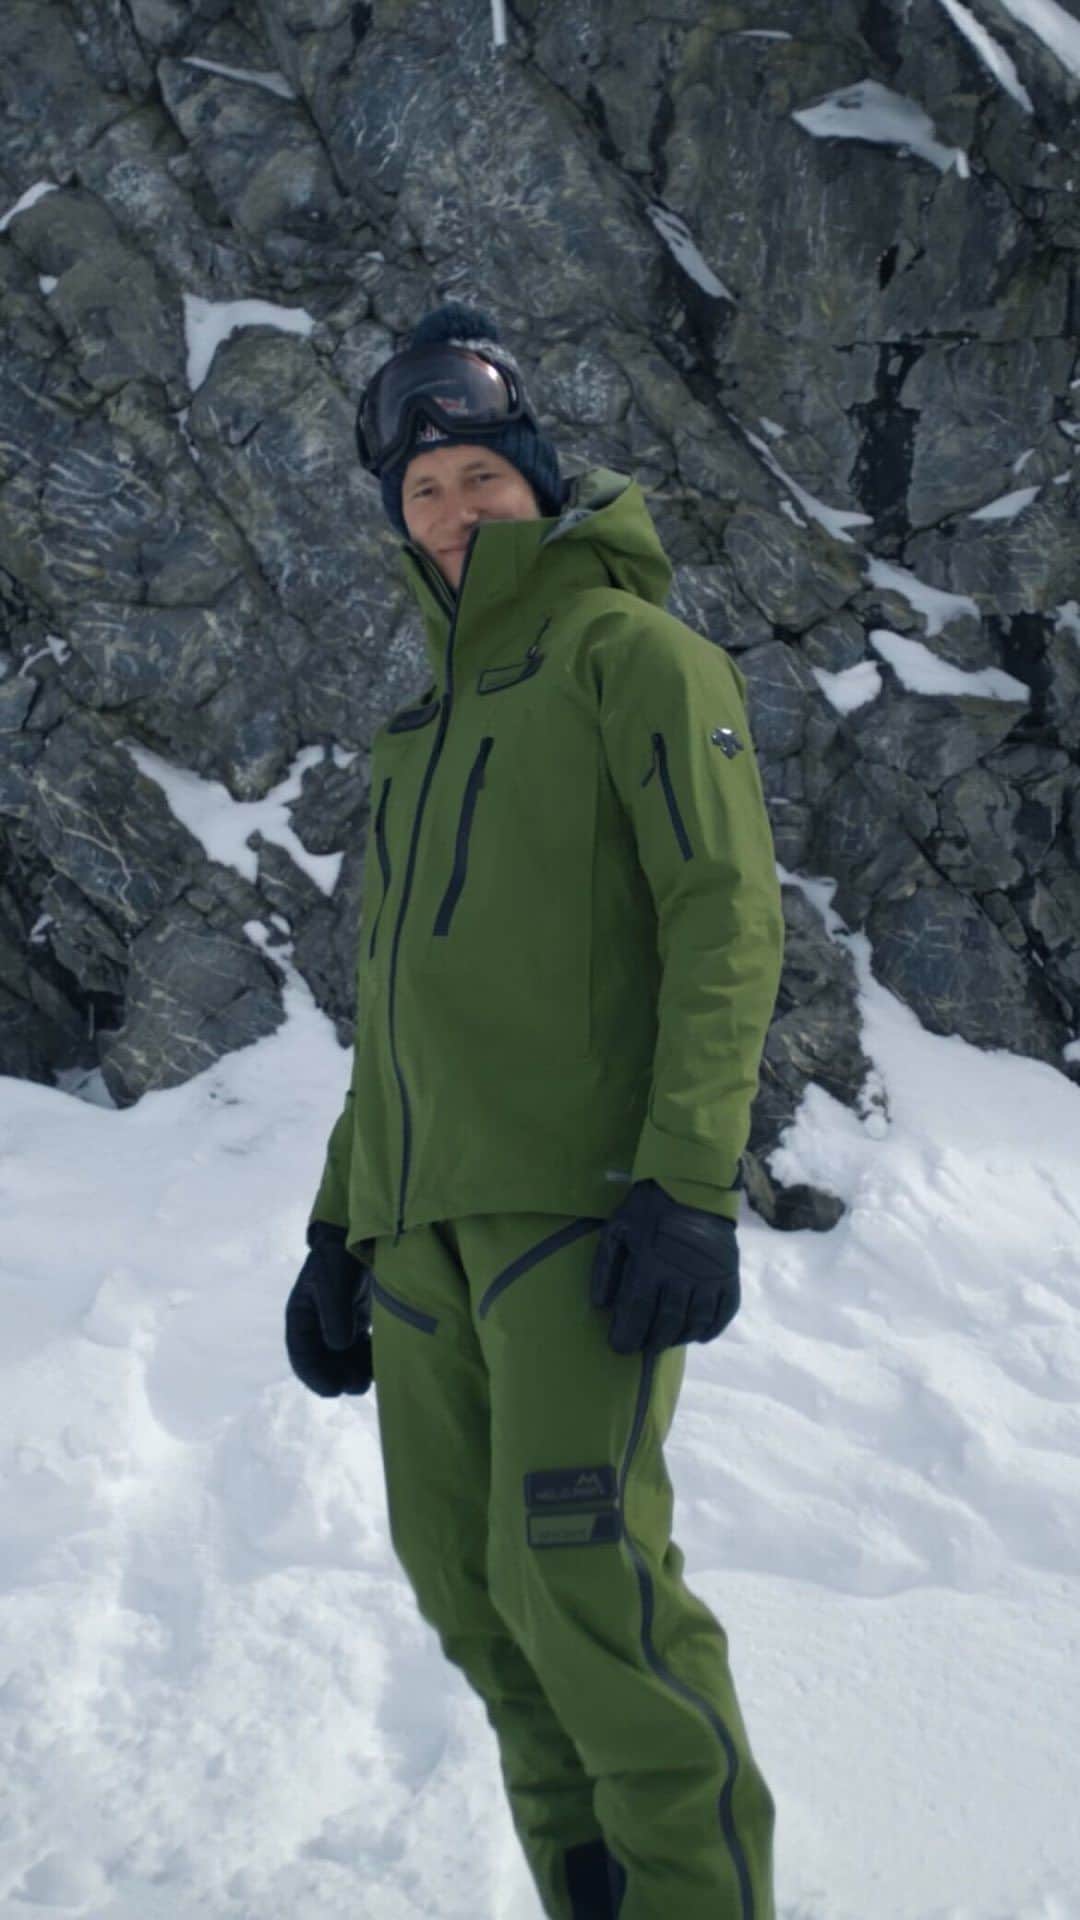 Descenteのインスタグラム：「The Marco Odermatt Collection builds on DESCENTE and Marco’s shared passion for skiing at the highest level. We have partnered with Marco since 2018, and are proud to collaborate on a collection that embodies Marco’s ski expertise, represents Descente‘s commitment to aesthetic functionality, and promises modern and innovative styling for every skier.  #odermattXdescente  #descente #designthatmoves  #descenteski #marcoodermatt  #skiseason #skier #skigear #skiwear #wintersports #ski #skiing」